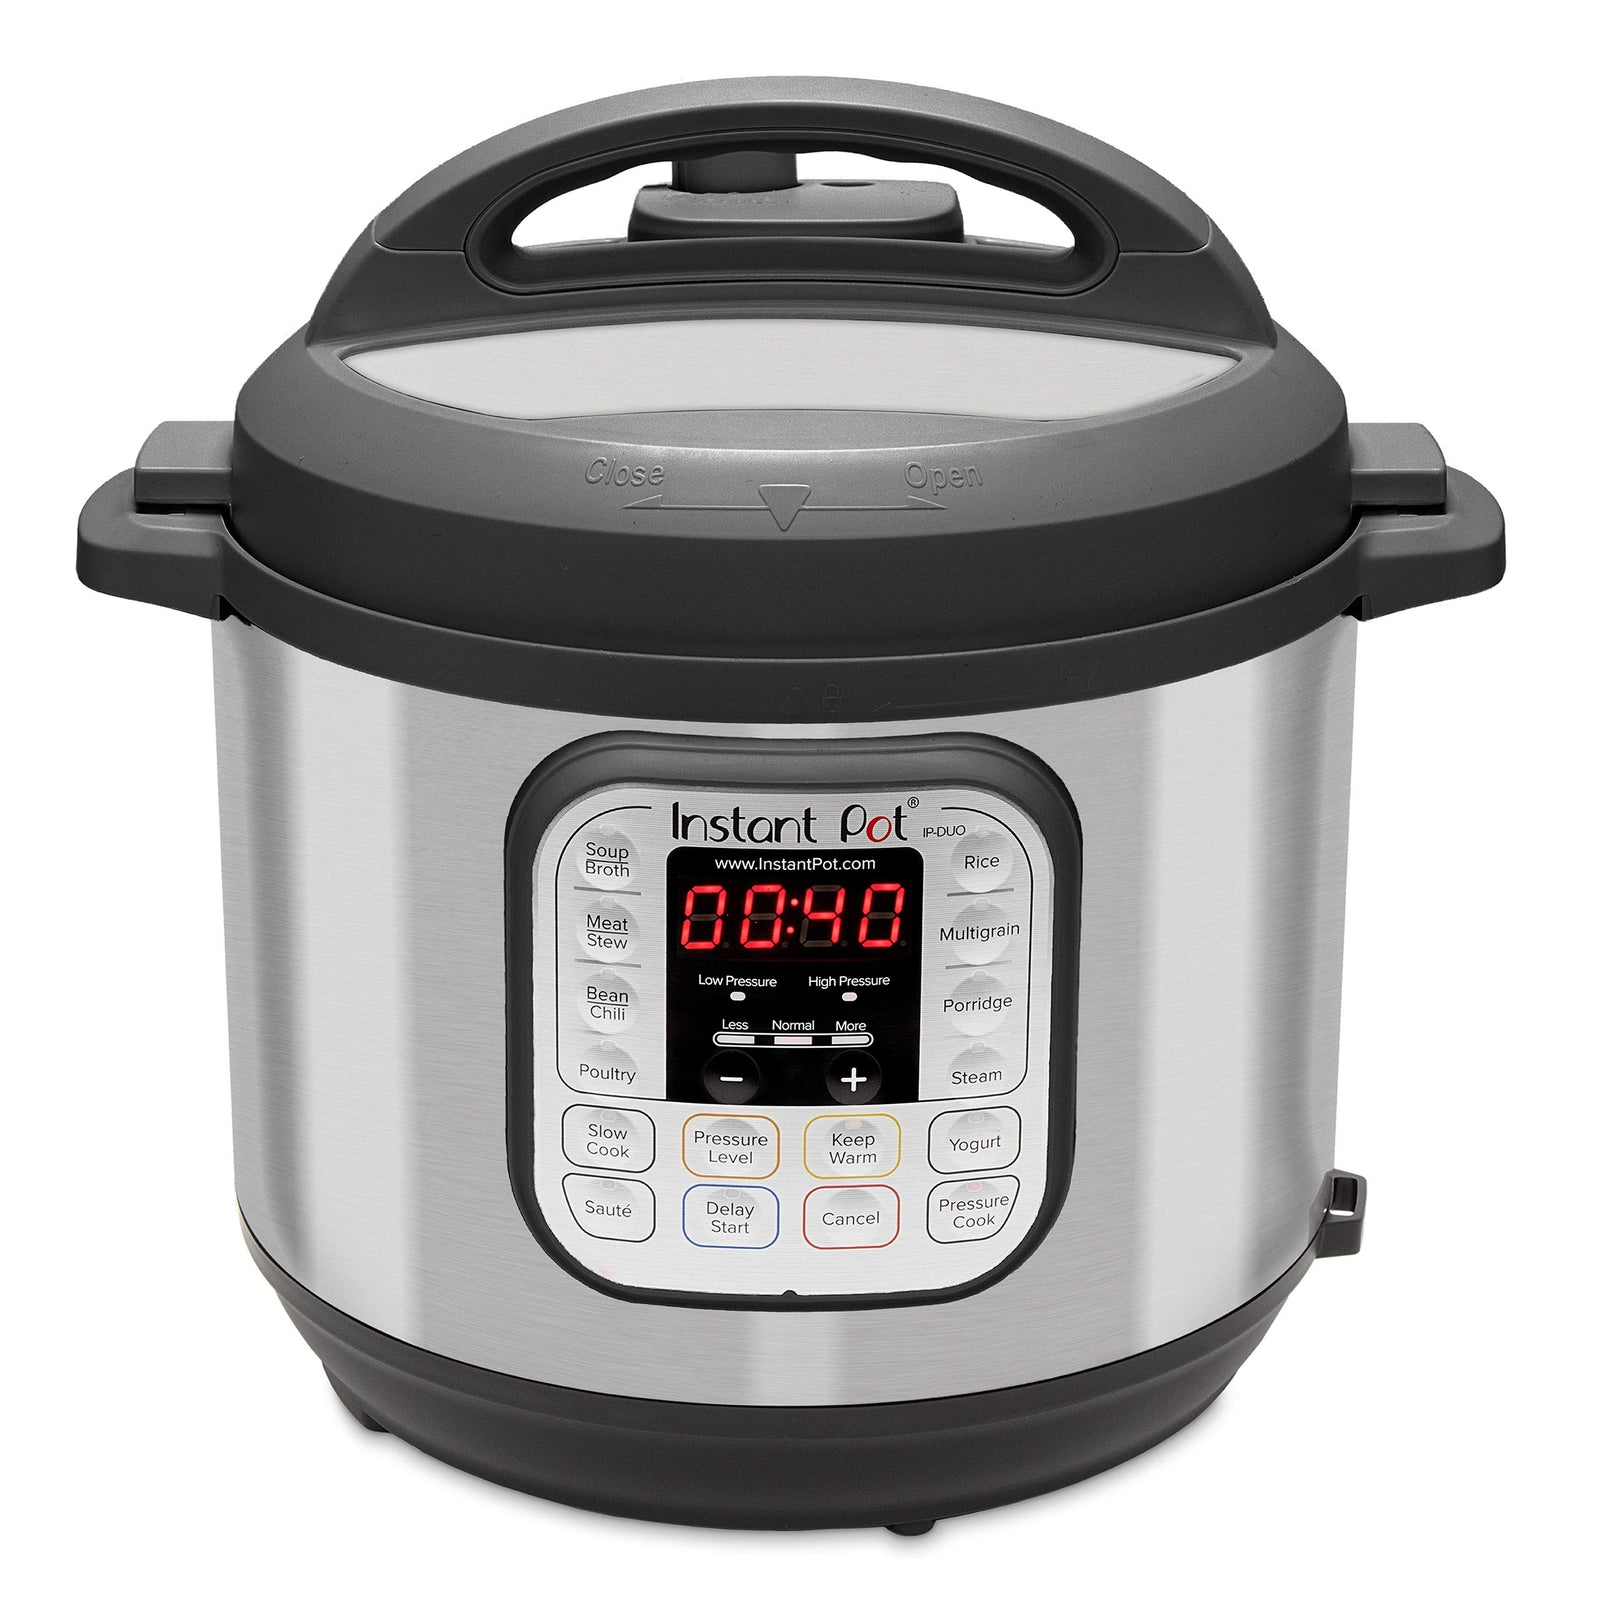 Instant Pot 6qt pressure cooker with baking accessory kit.